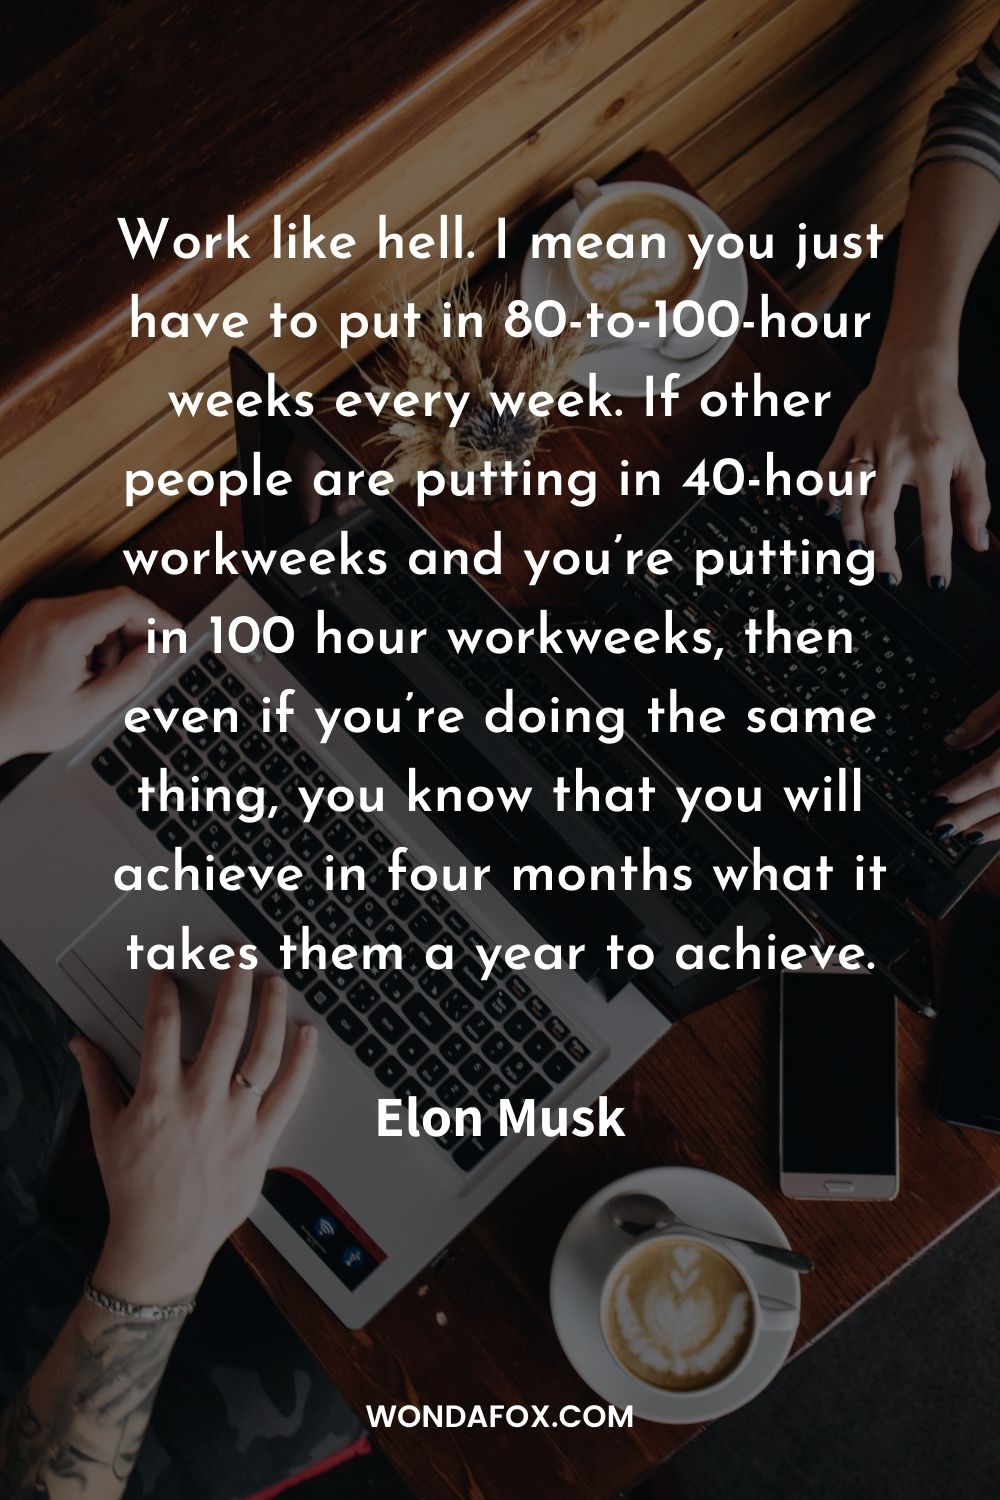 Work like hell. I mean you just have to put in 80-to-100-hour weeks every week. If other people are putting in 40-hour workweeks and you’re putting in 100 hour workweeks, then even if you’re doing the same thing, you know that you will achieve in four months what it takes them a year to achieve.